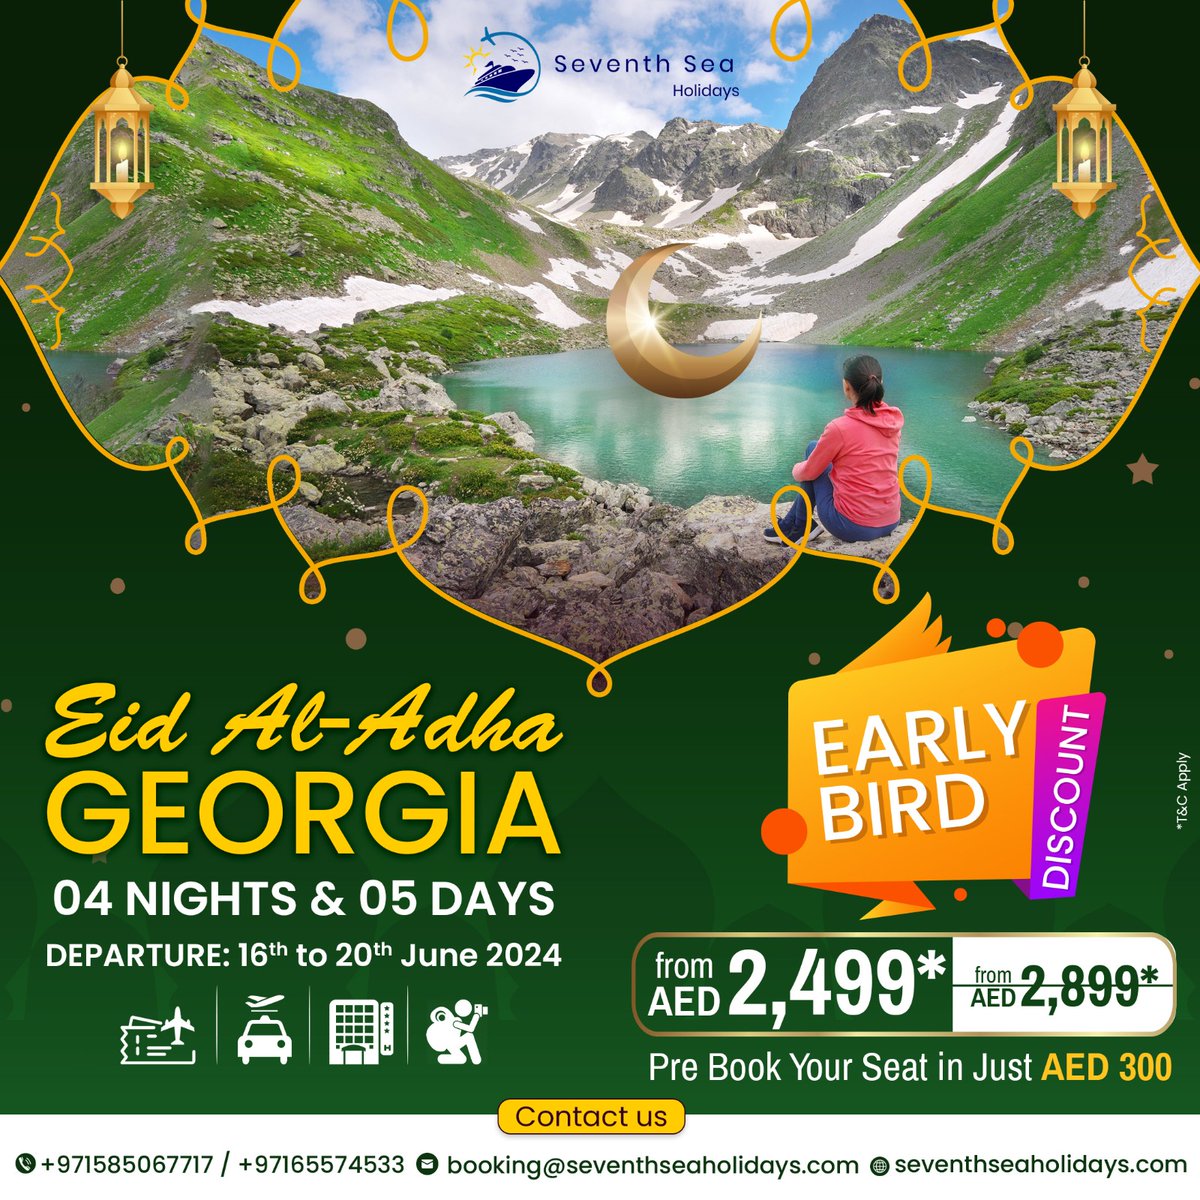 🌙🕌 Eid Al-Adha GEORGIA Holidays 🇬🇪

📅 Date: 16th to 20th June 2024 

4 NIGHTS & 5 DAYS 🌙

EARLY BIRD DISCOUNT starting from AED 2,499* 💰

Pre-book your seat with just AED 300! 📲💳

#EidAlAdha #GeorgiaHolidays #EarlyBirdOffer #SeventhSeaHolidays 🌙🇬🇪✨